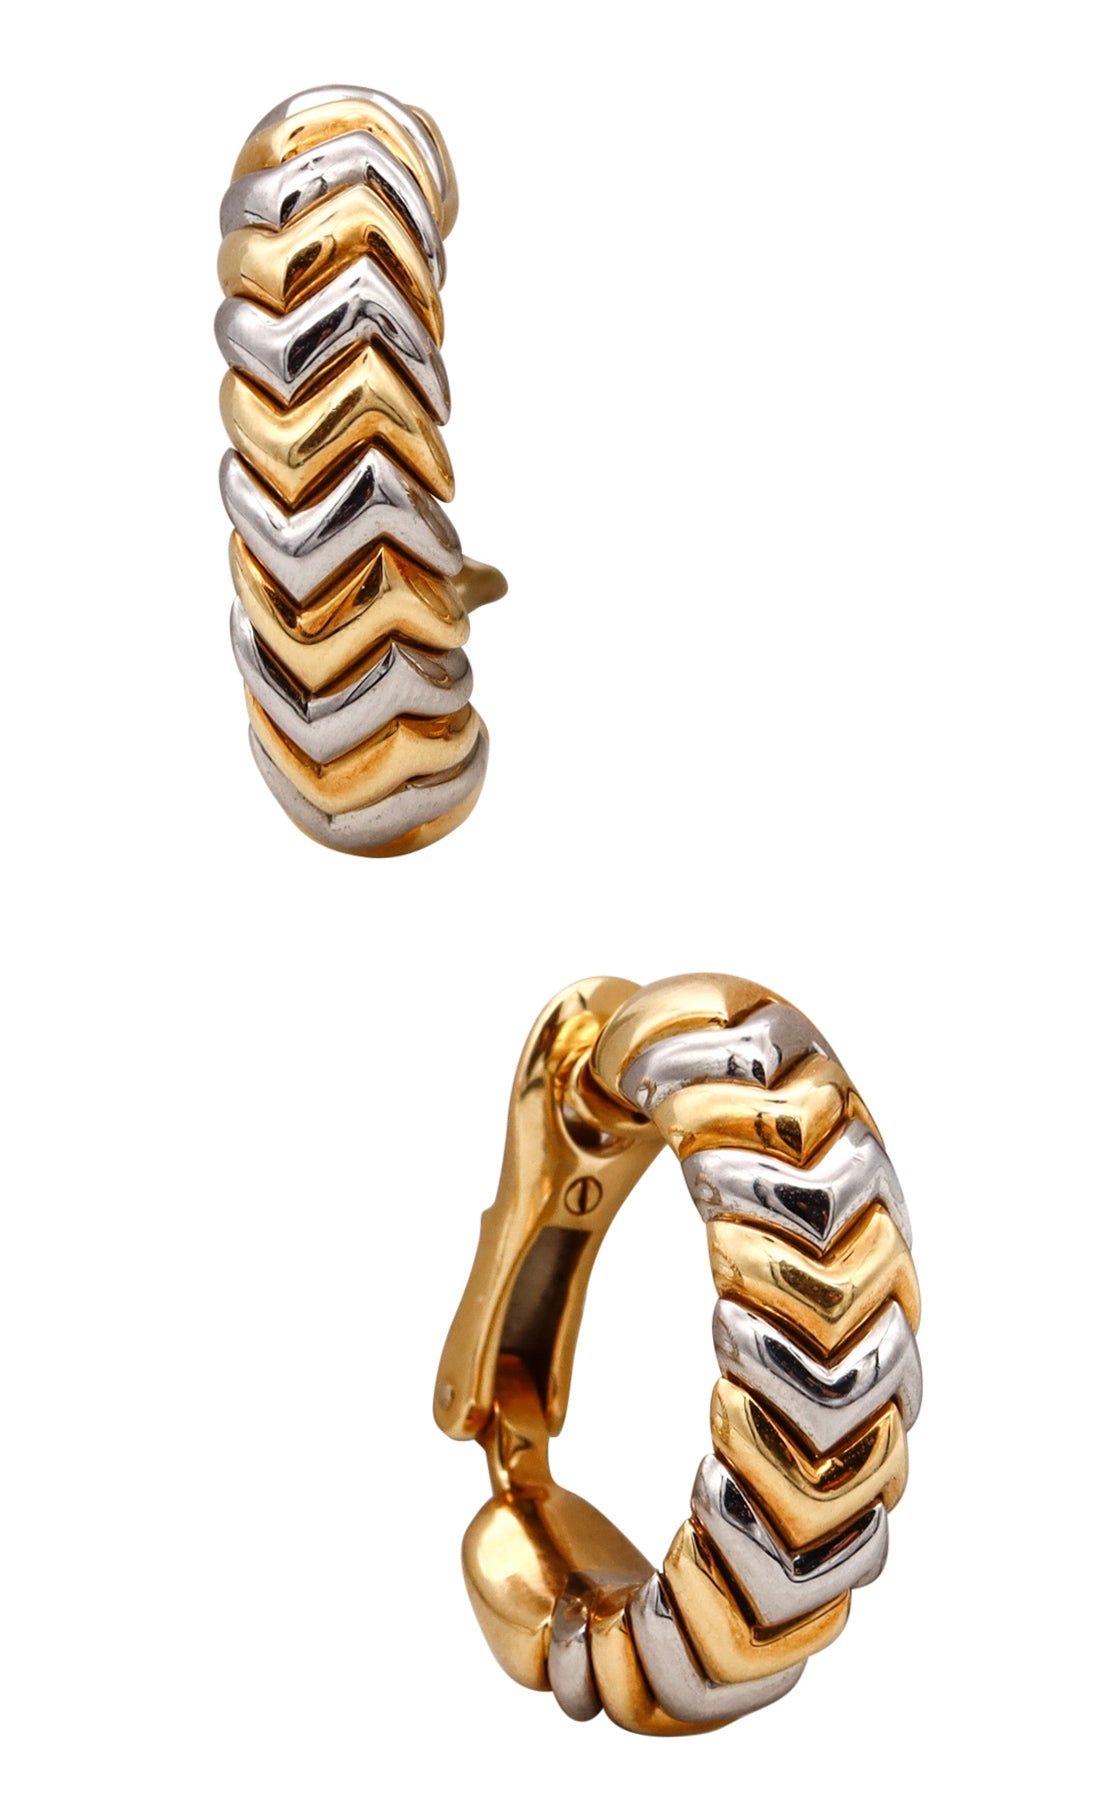 *Bvlgari Roma Spiga collection hoop earrings in two tones of 18 kt gold